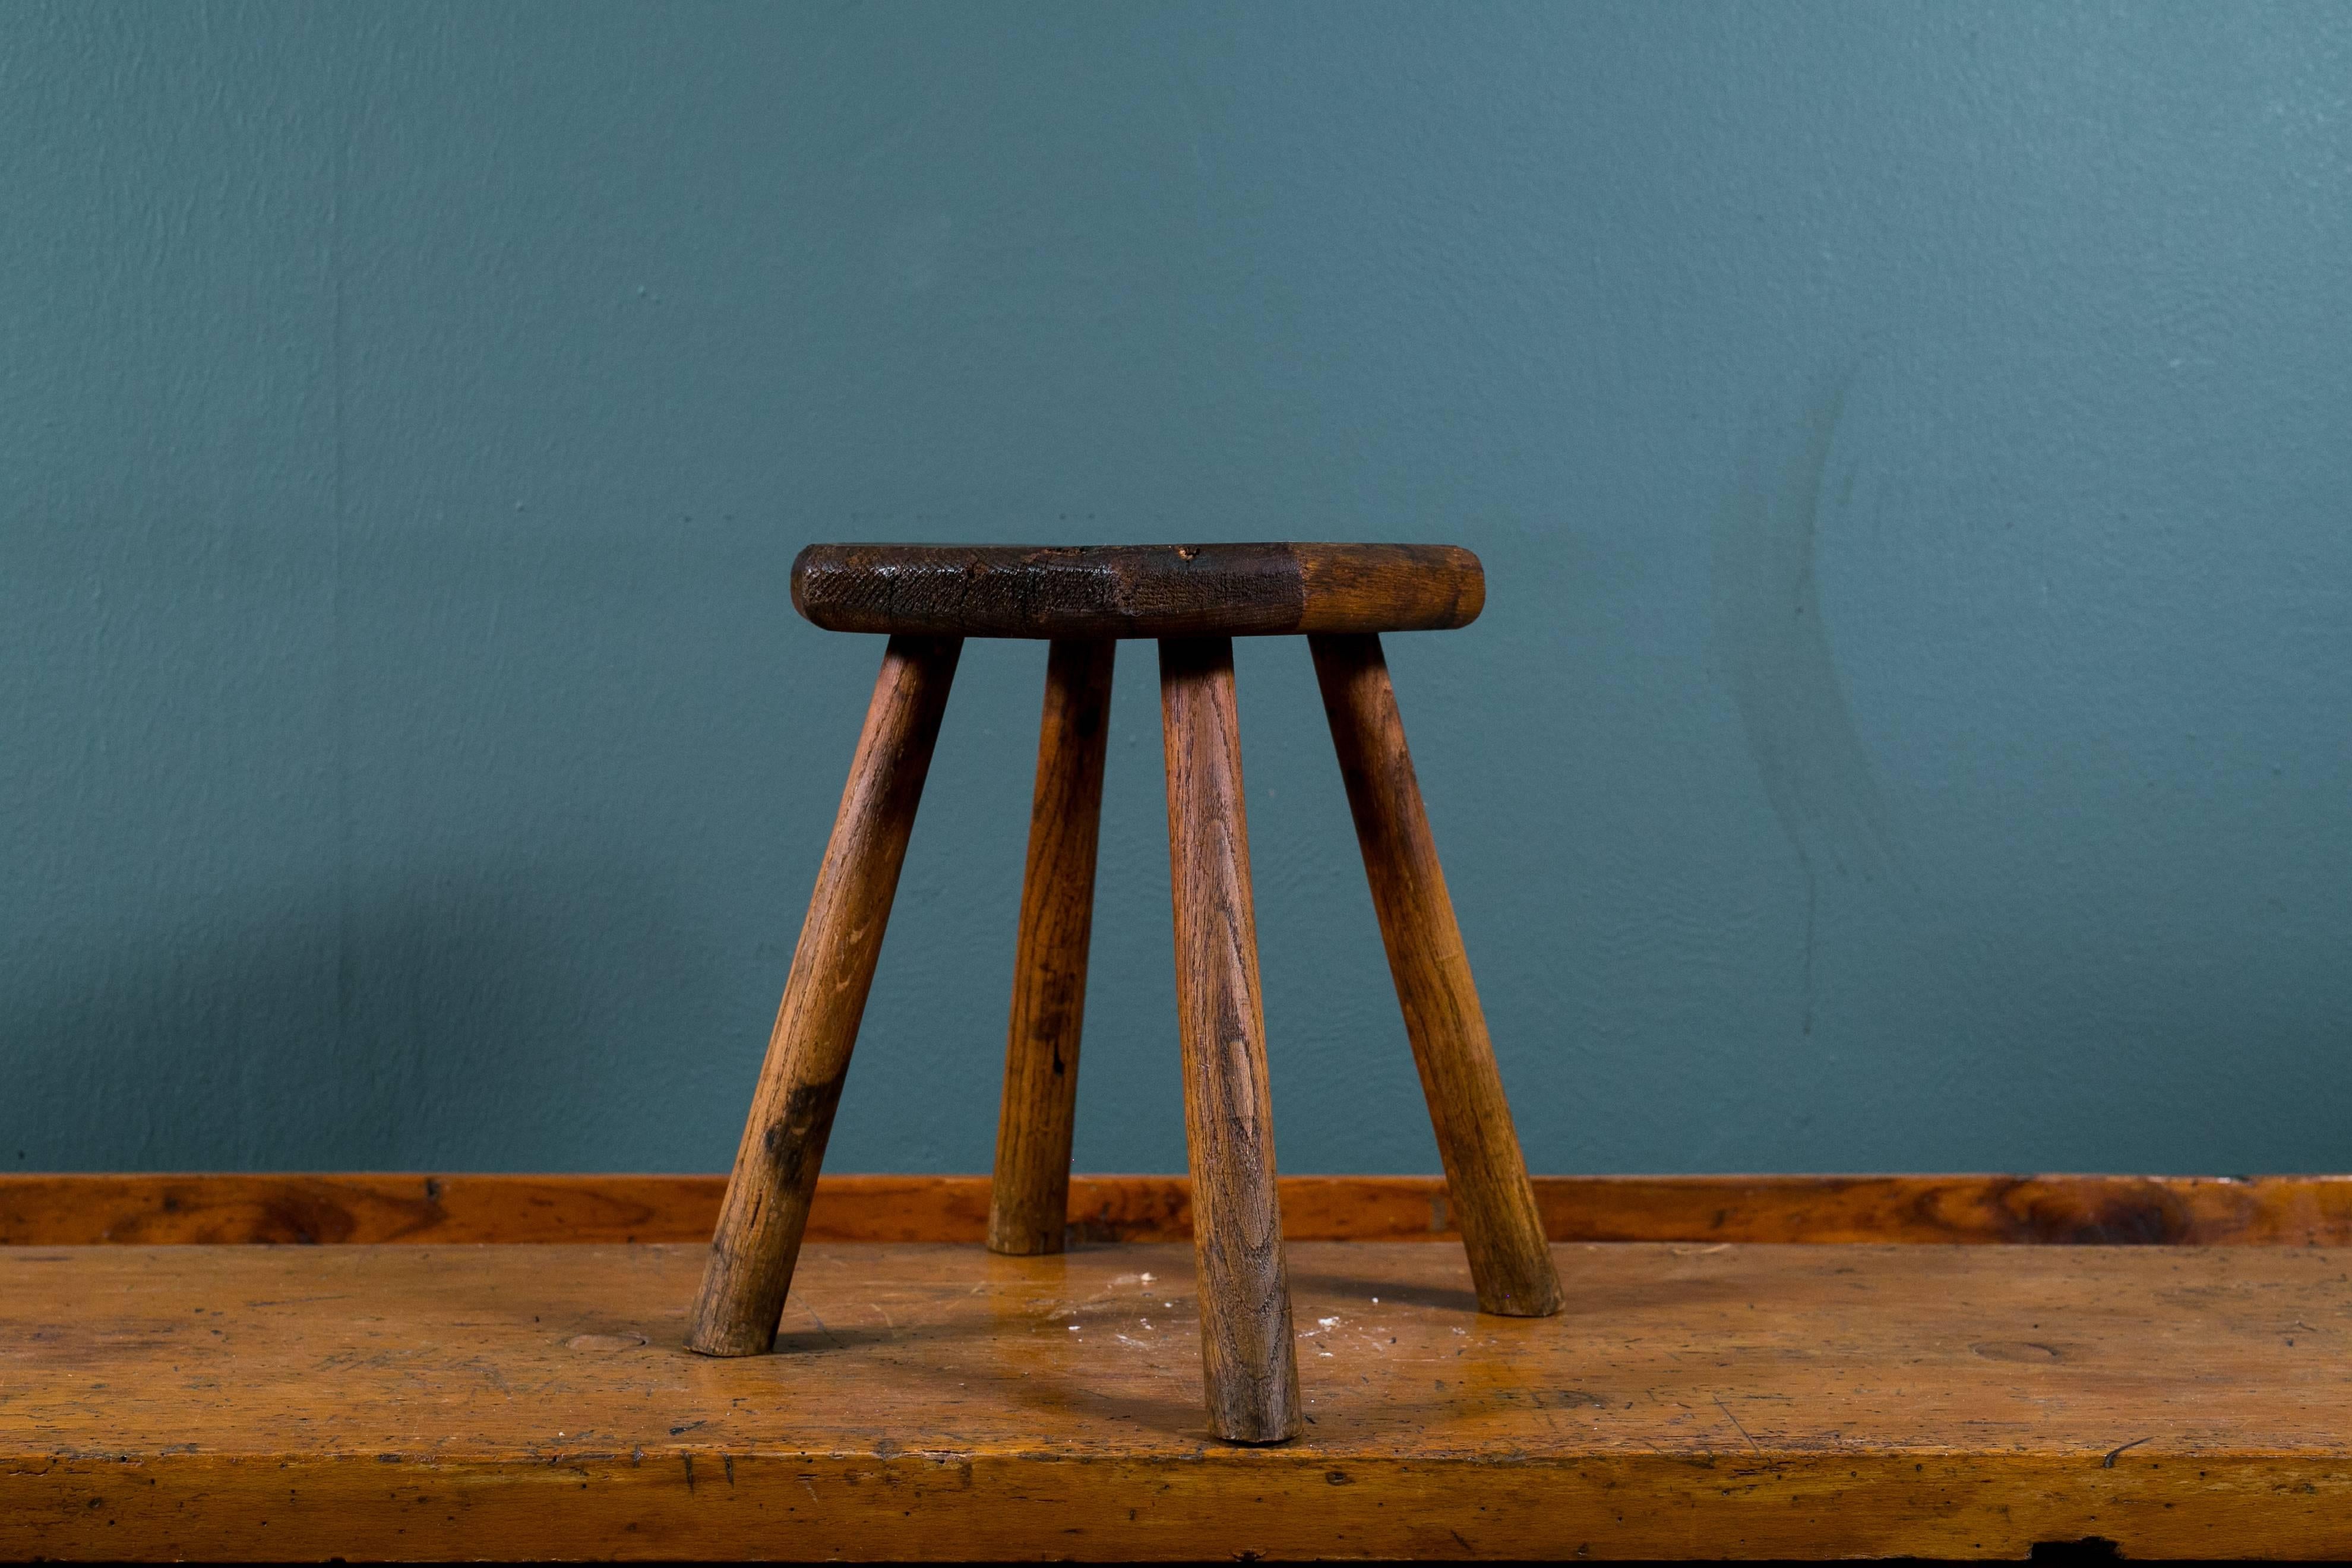 Charming, Primitive small oak stool. All hand-carved and handcrafted in a rustic style. Top features squared off corners to make an octagon. Would be great as a low bedside table.